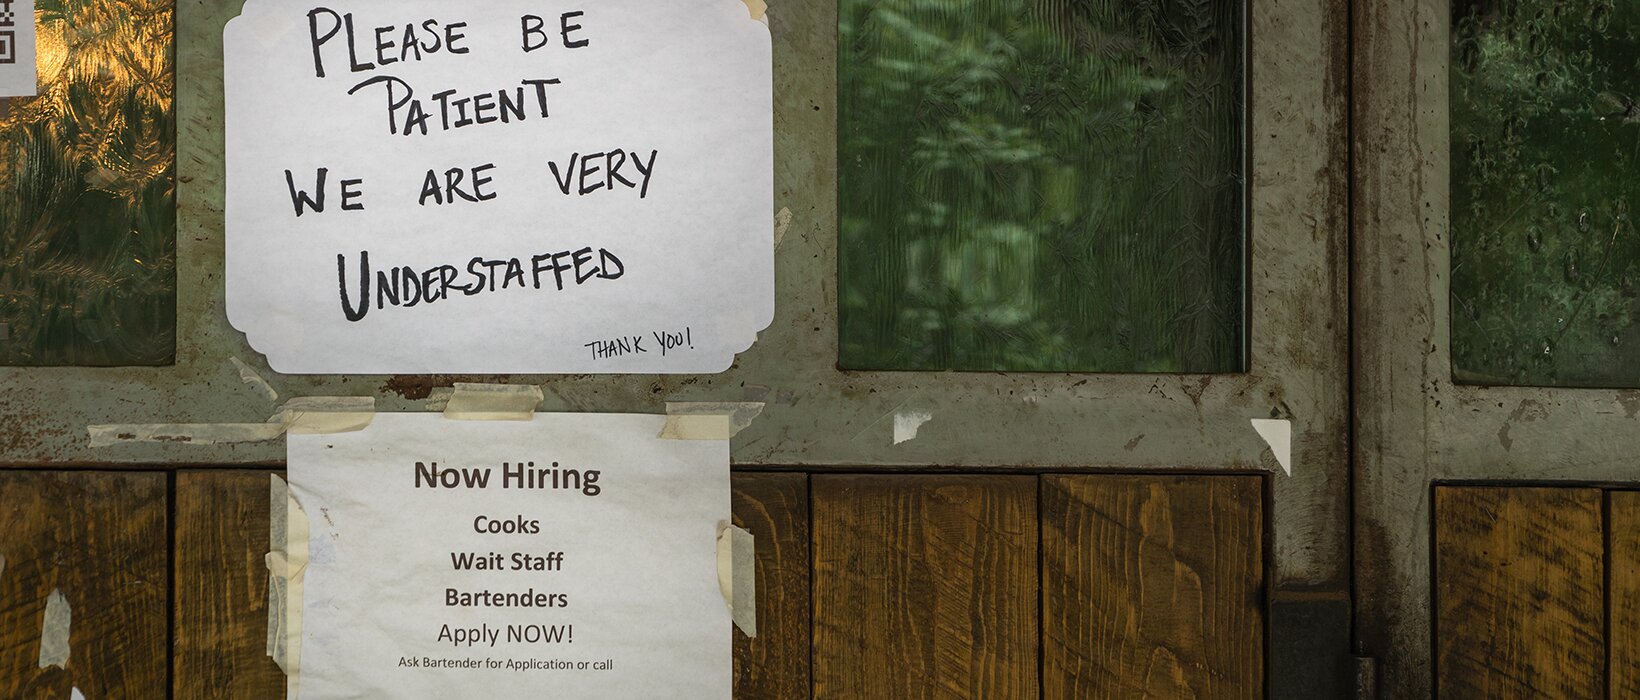 Hospitality job vacancies fall but remain above pre-pandemic levels